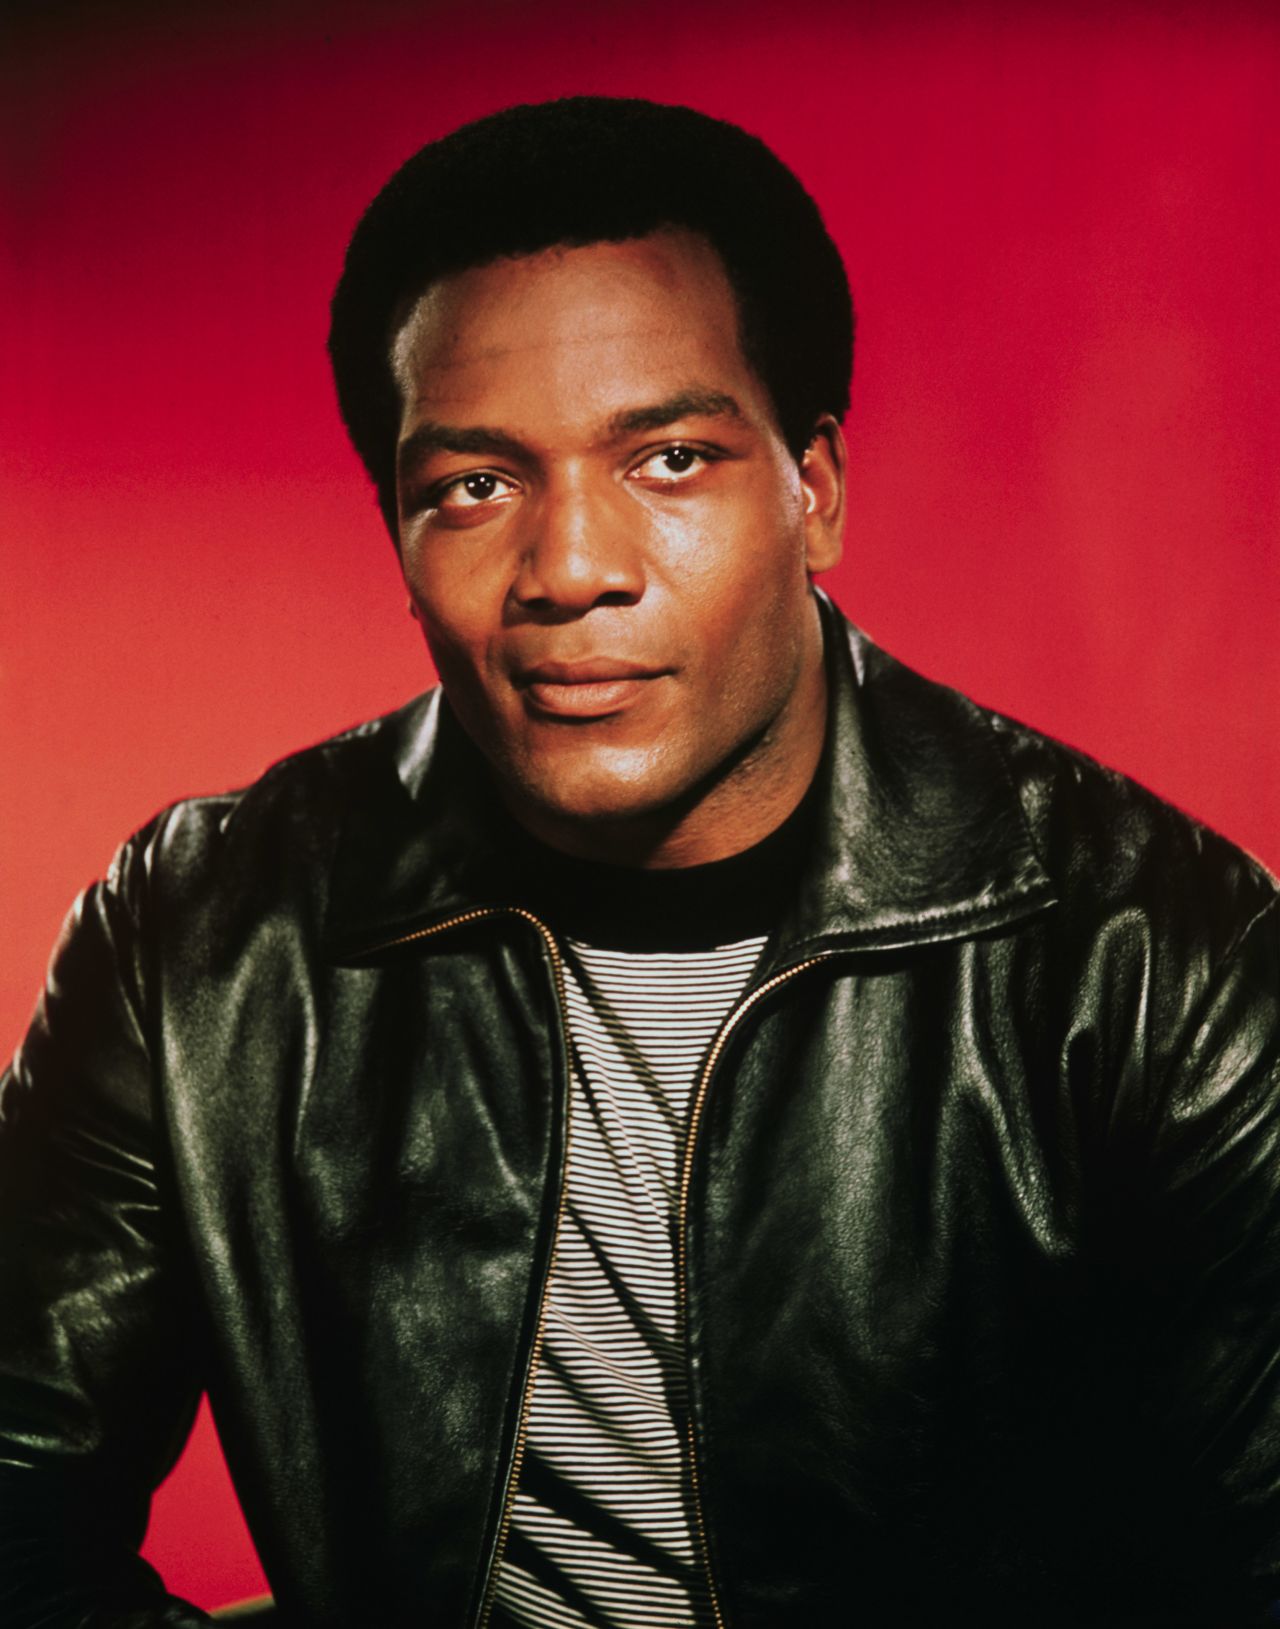 Brown appears in a publicity photo for his acting career. After retiring, he appeared in more than 50 film and television projects.